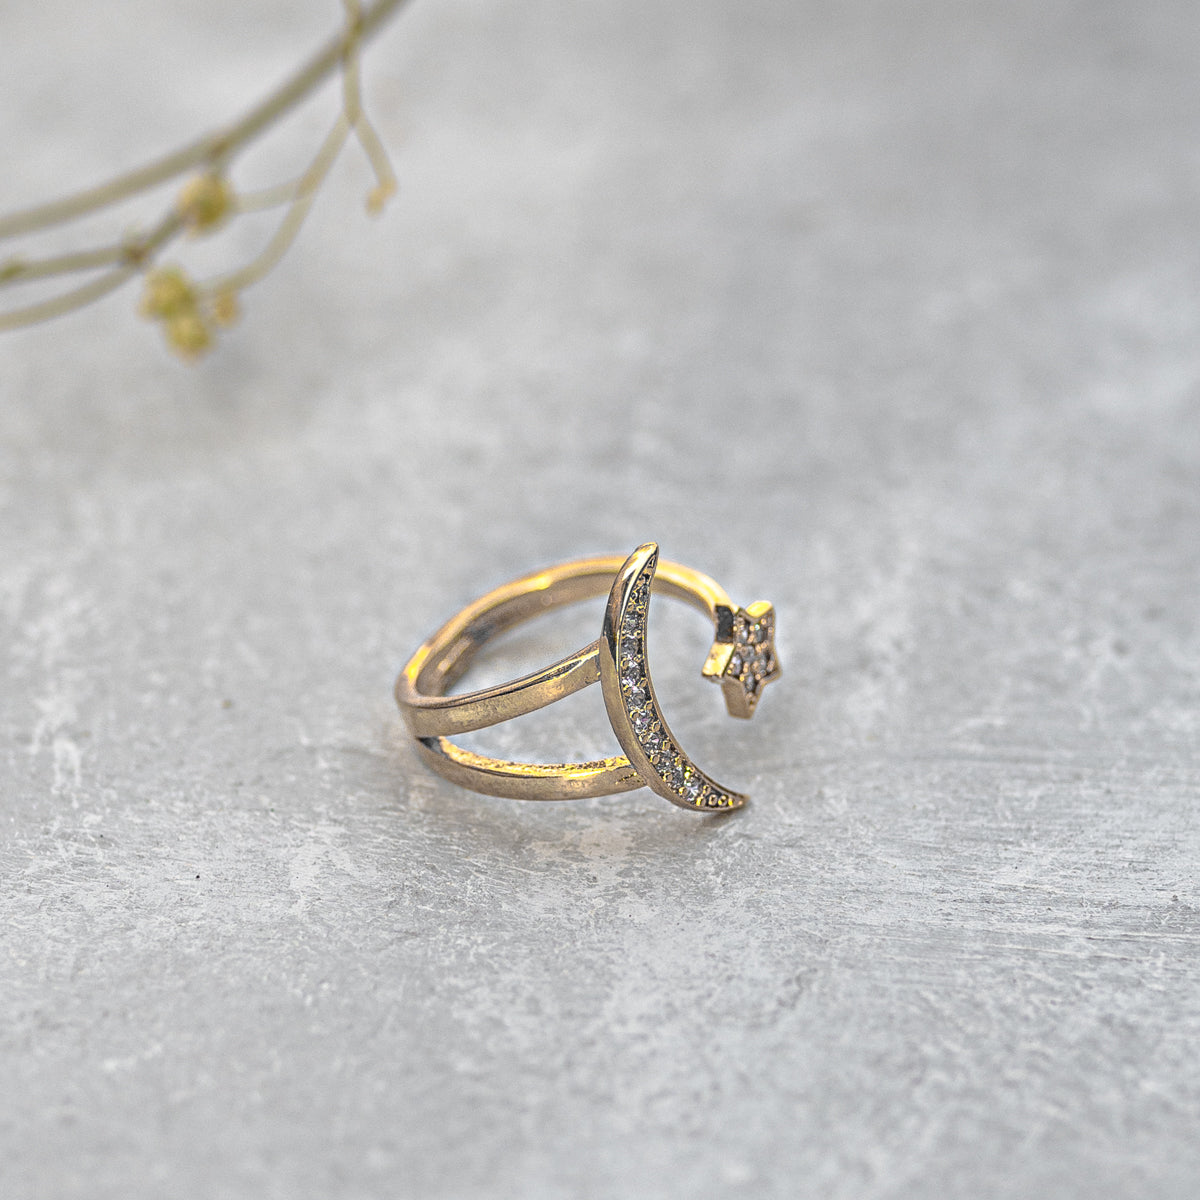 CZ Starburst Ring, Gold Filled North Star Ring, Minimalist Ring, Astrology  Ring, Open Adjustable Ring, Stackable Ring, Gift for Her, RG166 -  BeadsCreation4u